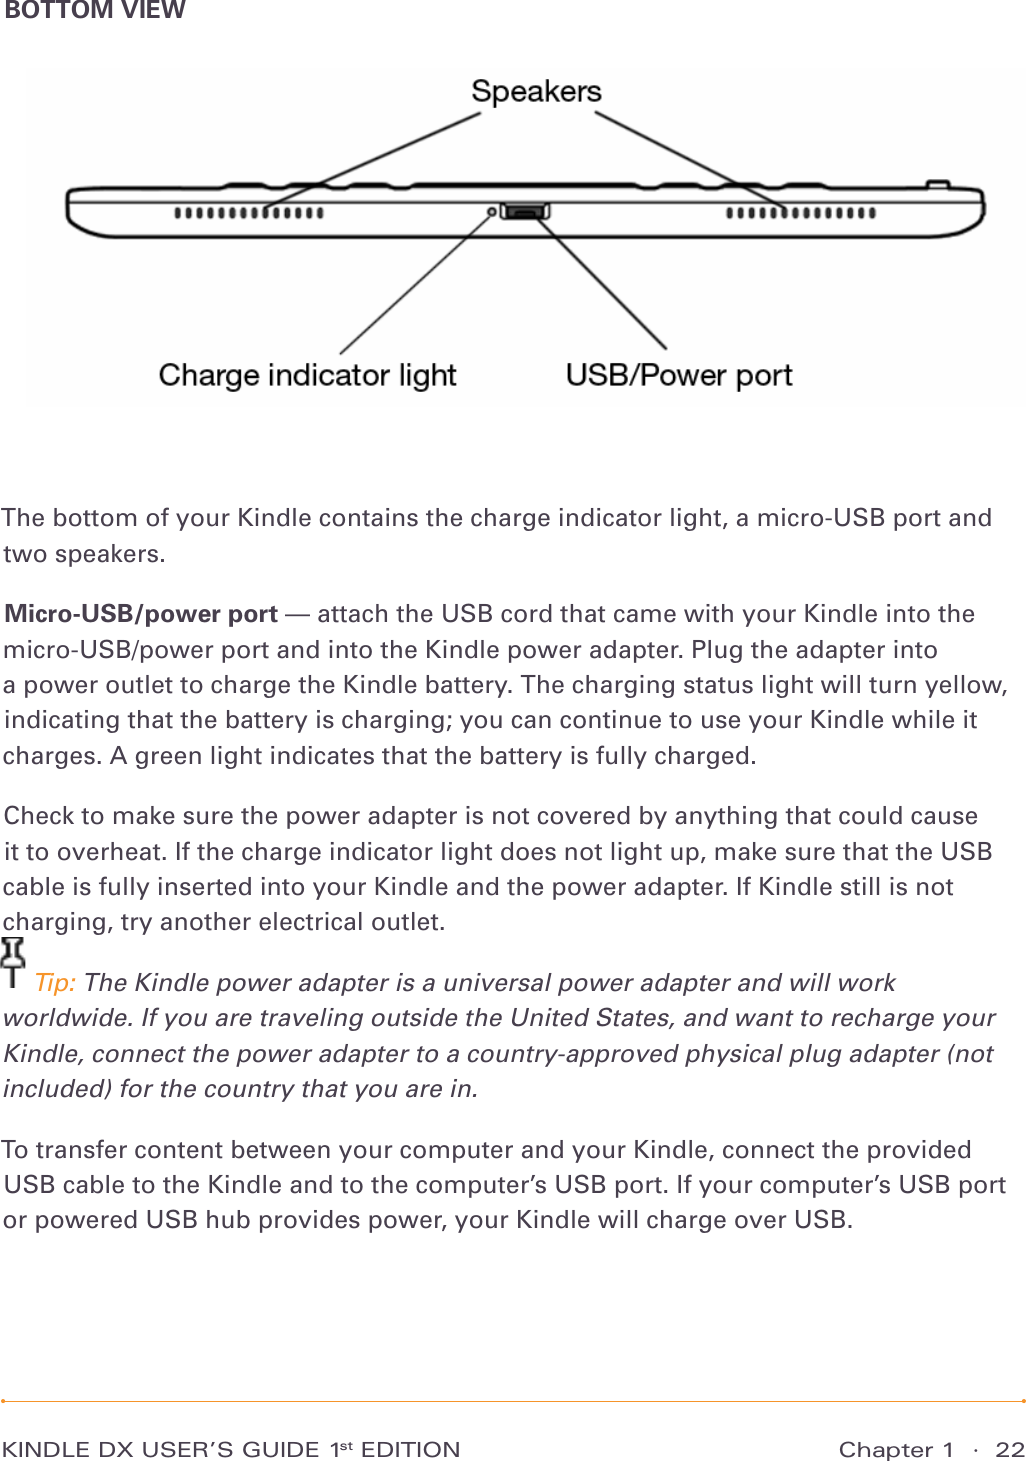 Chapter 1  ·  22KINDLE DX USER’S GUIDE 1st EDITIONBOTTOM VIEWThe bottom of your Kindle contains the charge indicator light, a micro-USB port and two speakers.Micro-USB/power port — attach the USB cord that came with your Kindle into the micro-USB/power port and into the Kindle power adapter. Plug the adapter into  a power outlet to charge the Kindle battery. The charging status light will turn yellow, indicating that the battery is charging; you can continue to use your Kindle while it charges. A green light indicates that the battery is fully charged.Check to make sure the power adapter is not covered by anything that could cause it to overheat. If the charge indicator light does not light up, make sure that the USB cable is fully inserted into your Kindle and the power adapter. If Kindle still is not charging, try another electrical outlet. Tip: The Kindle power adapter is a universal power adapter and will work worldwide. If you are traveling outside the United States, and want to recharge your Kindle, connect the power adapter to a country-approved physical plug adapter (not included) for the country that you are in.To transfer content between your computer and your Kindle, connect the provided USB cable to the Kindle and to the computer’s USB port. If your computer’s USB port or powered USB hub provides power, your Kindle will charge over USB.